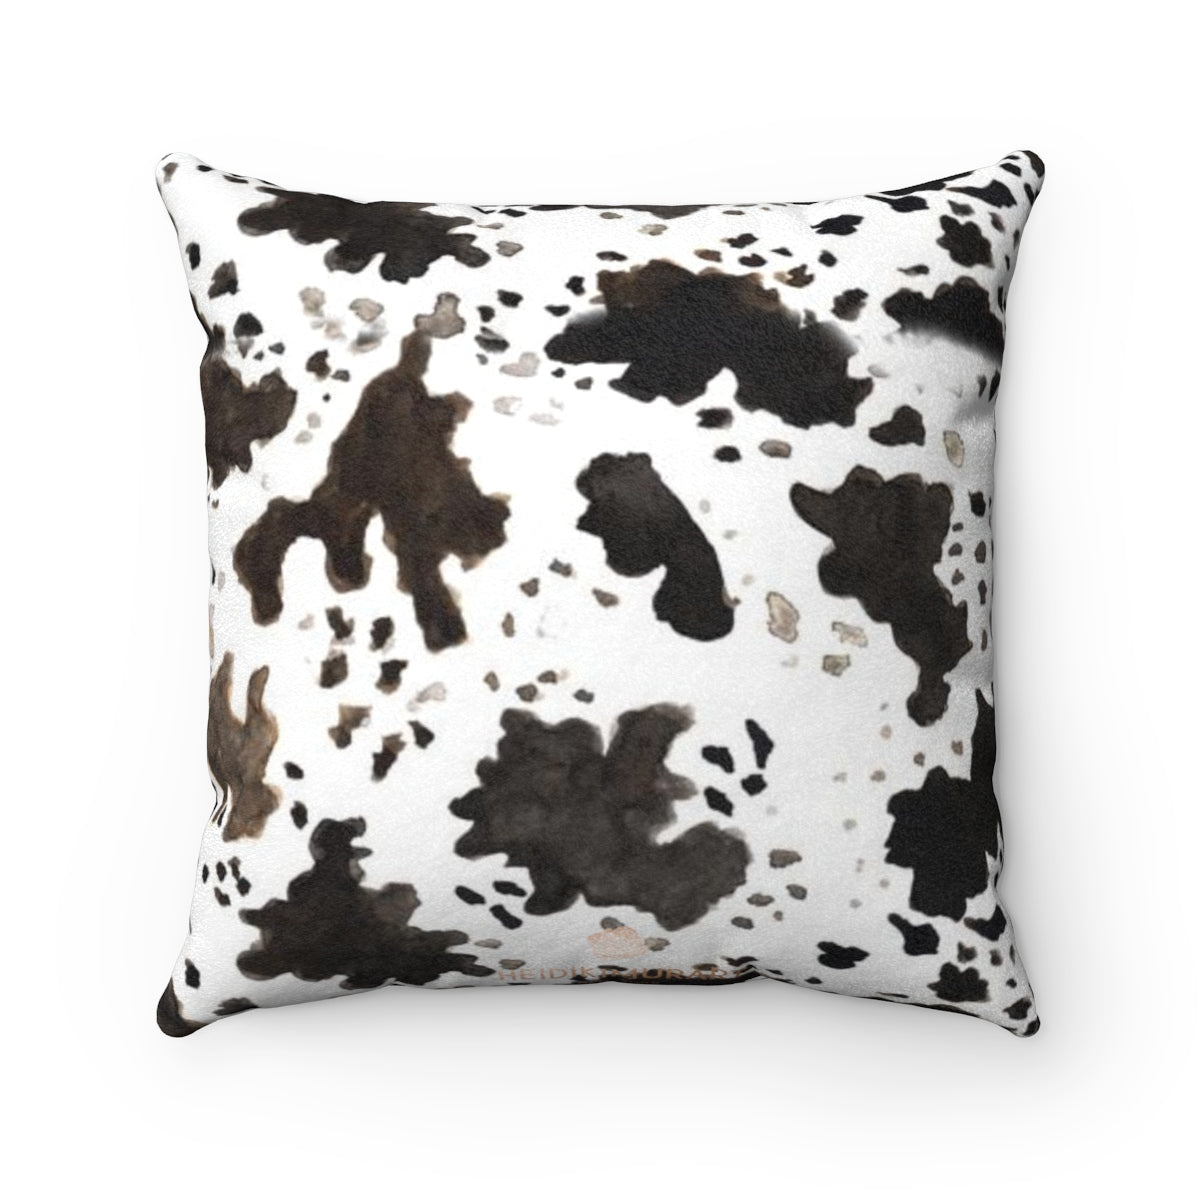 Cow Pattern Double Sided Print 100% Faux Suede Cover Square Pillow Pillow Included-Pillow-14x14-Heidi Kimura Art LLC